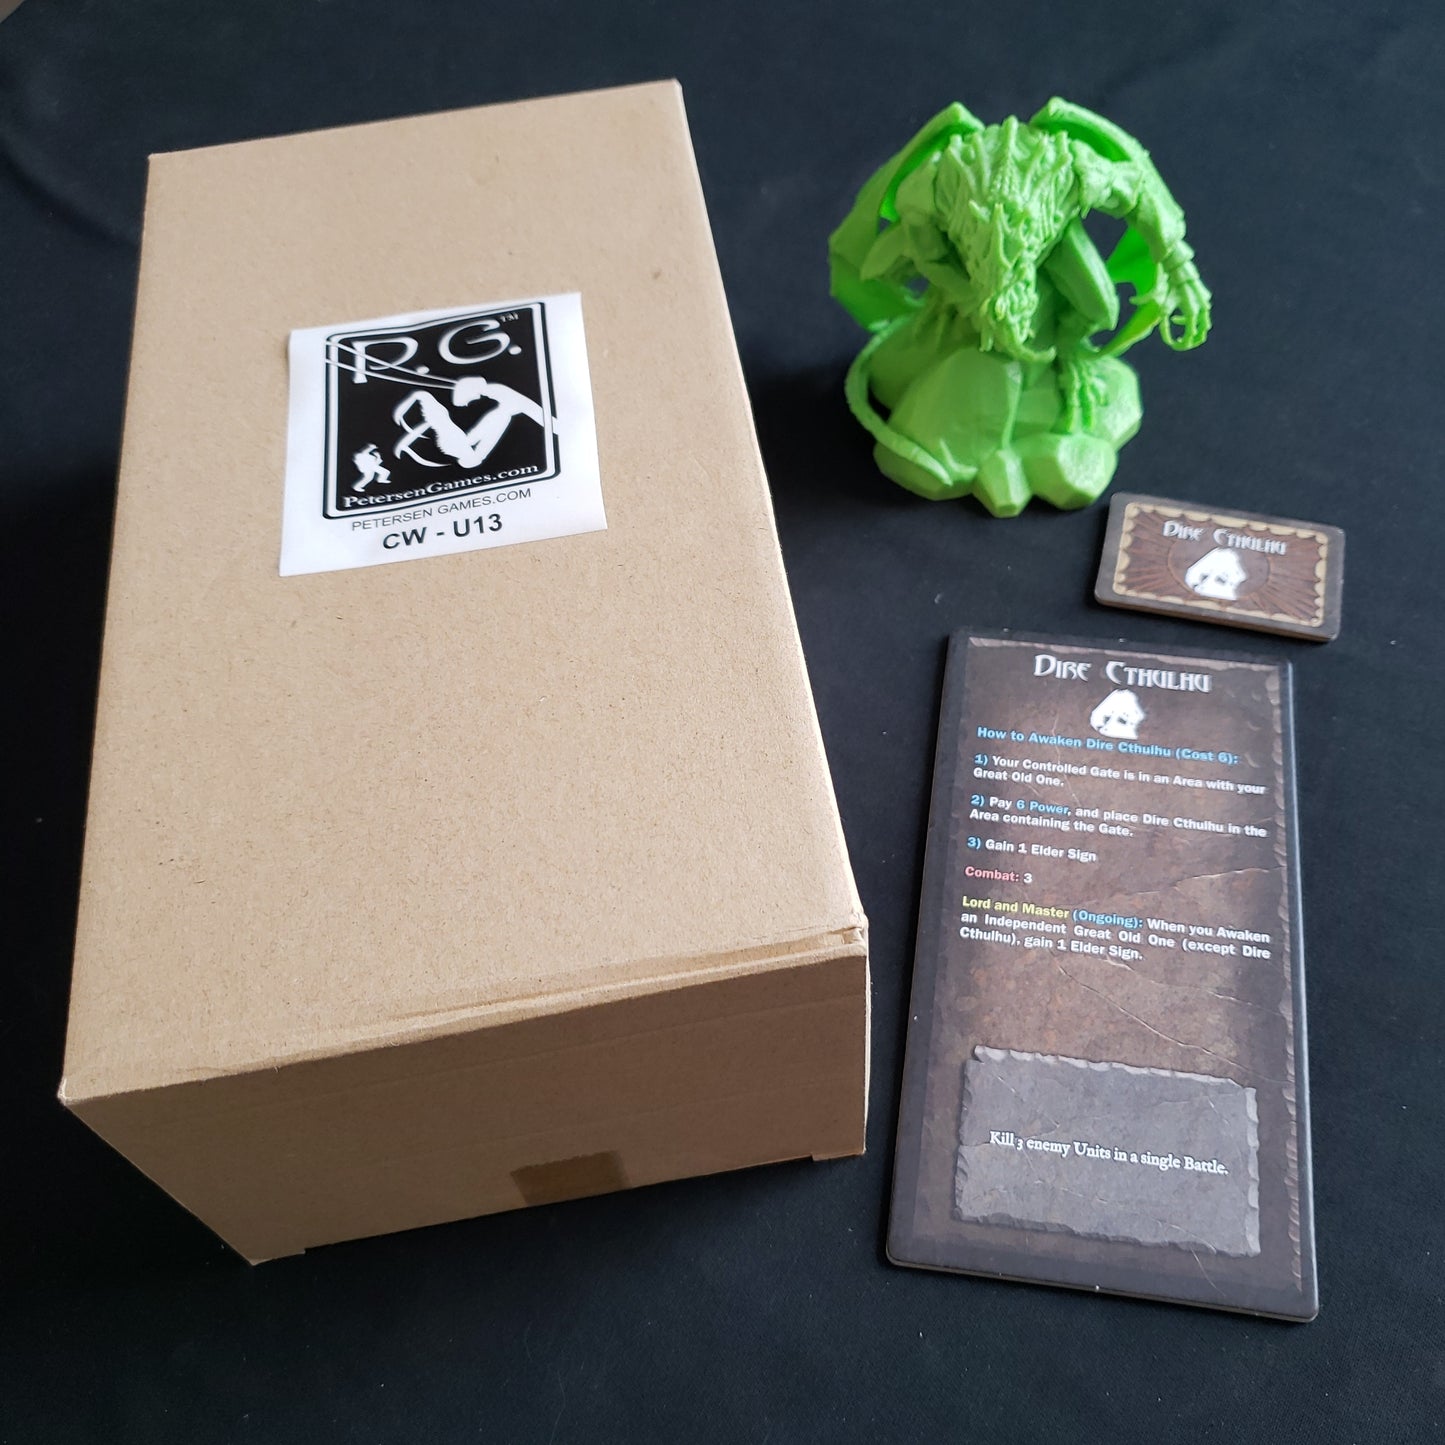 Image shows the box, miniature and components for the Dire Cthulhu Expansion for the Cthulhu Wars board game